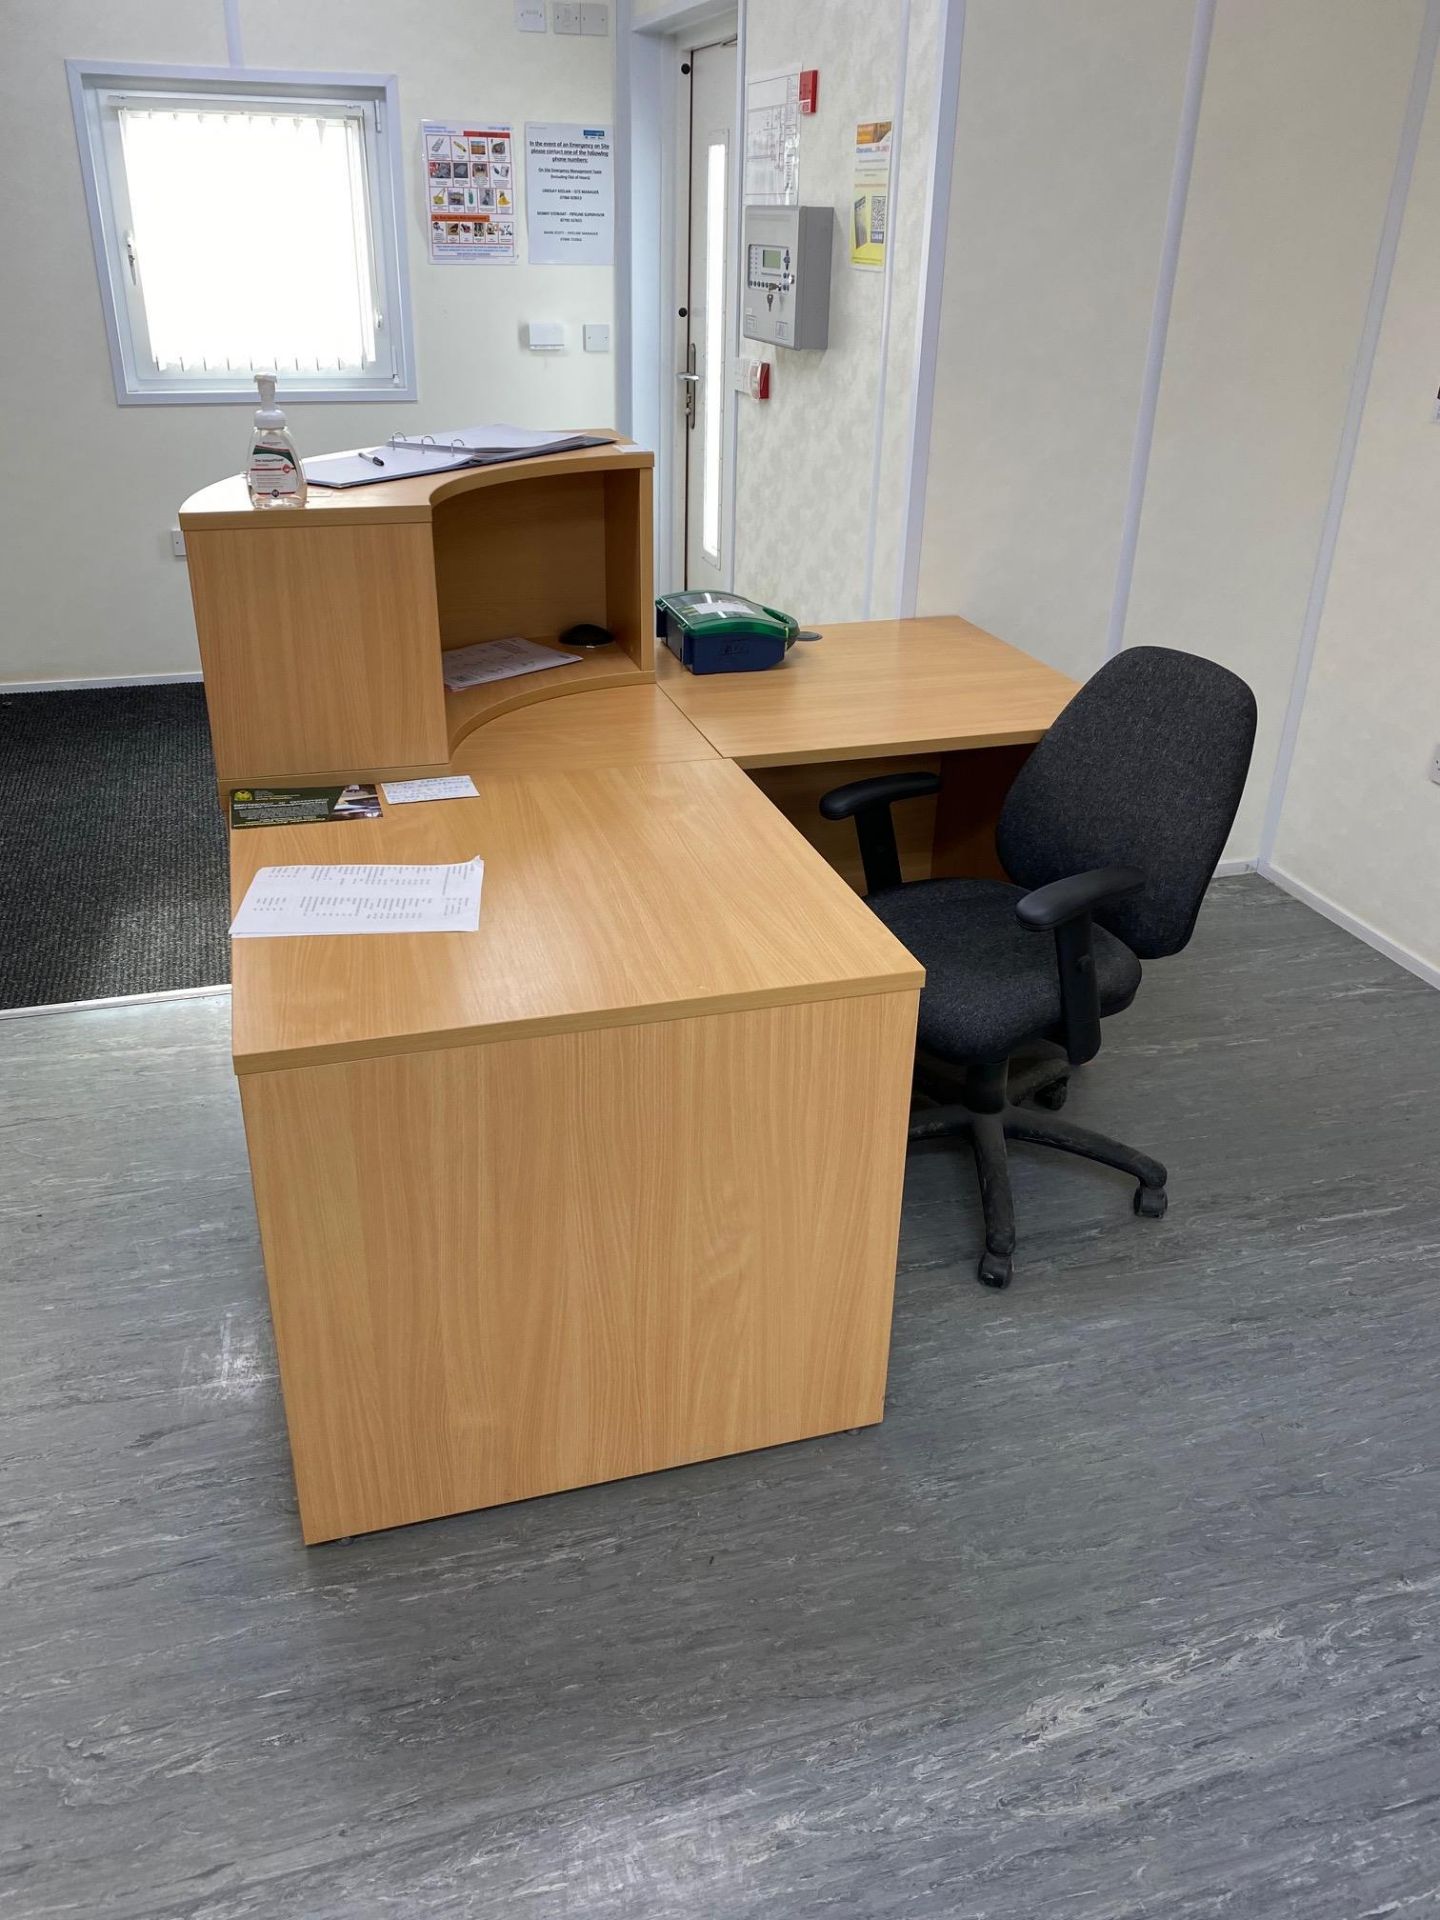 The Modular Building Furniture Throughout the Building Including: Reception Desk Light Oak - Image 2 of 24